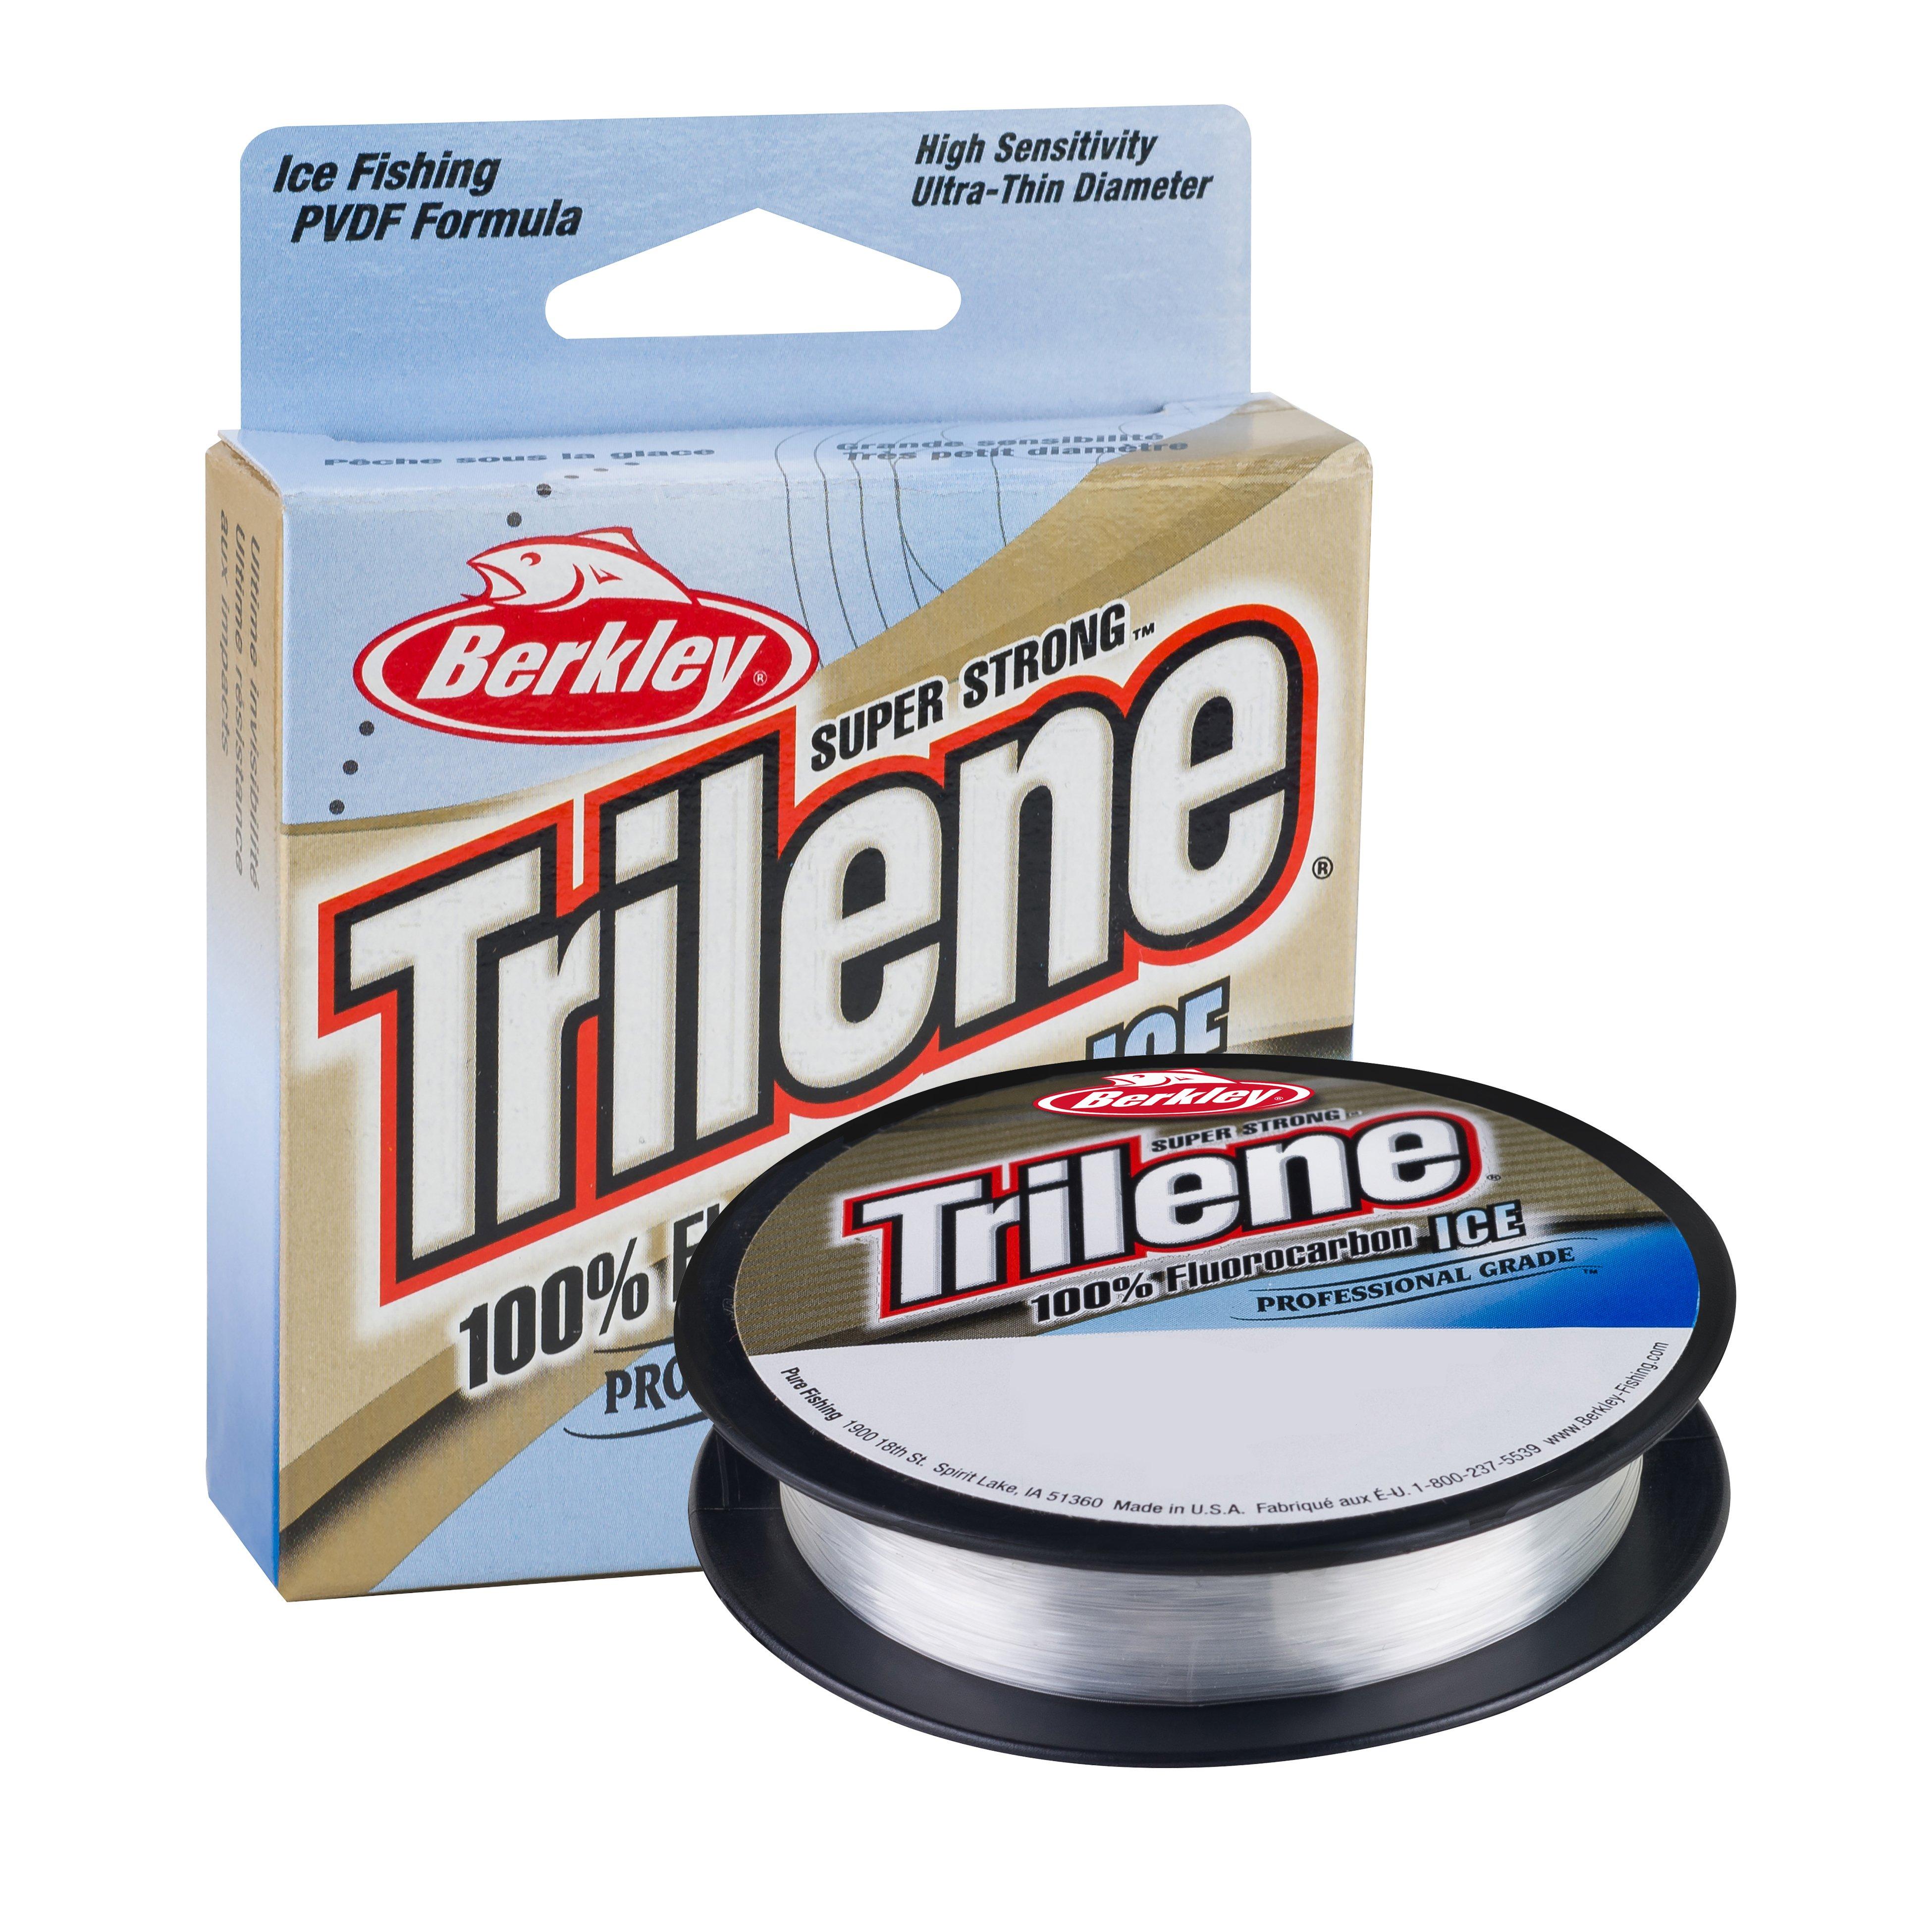 Frost Ice Premium Fluorocarbon Ice Fishing Line (8 LB only)